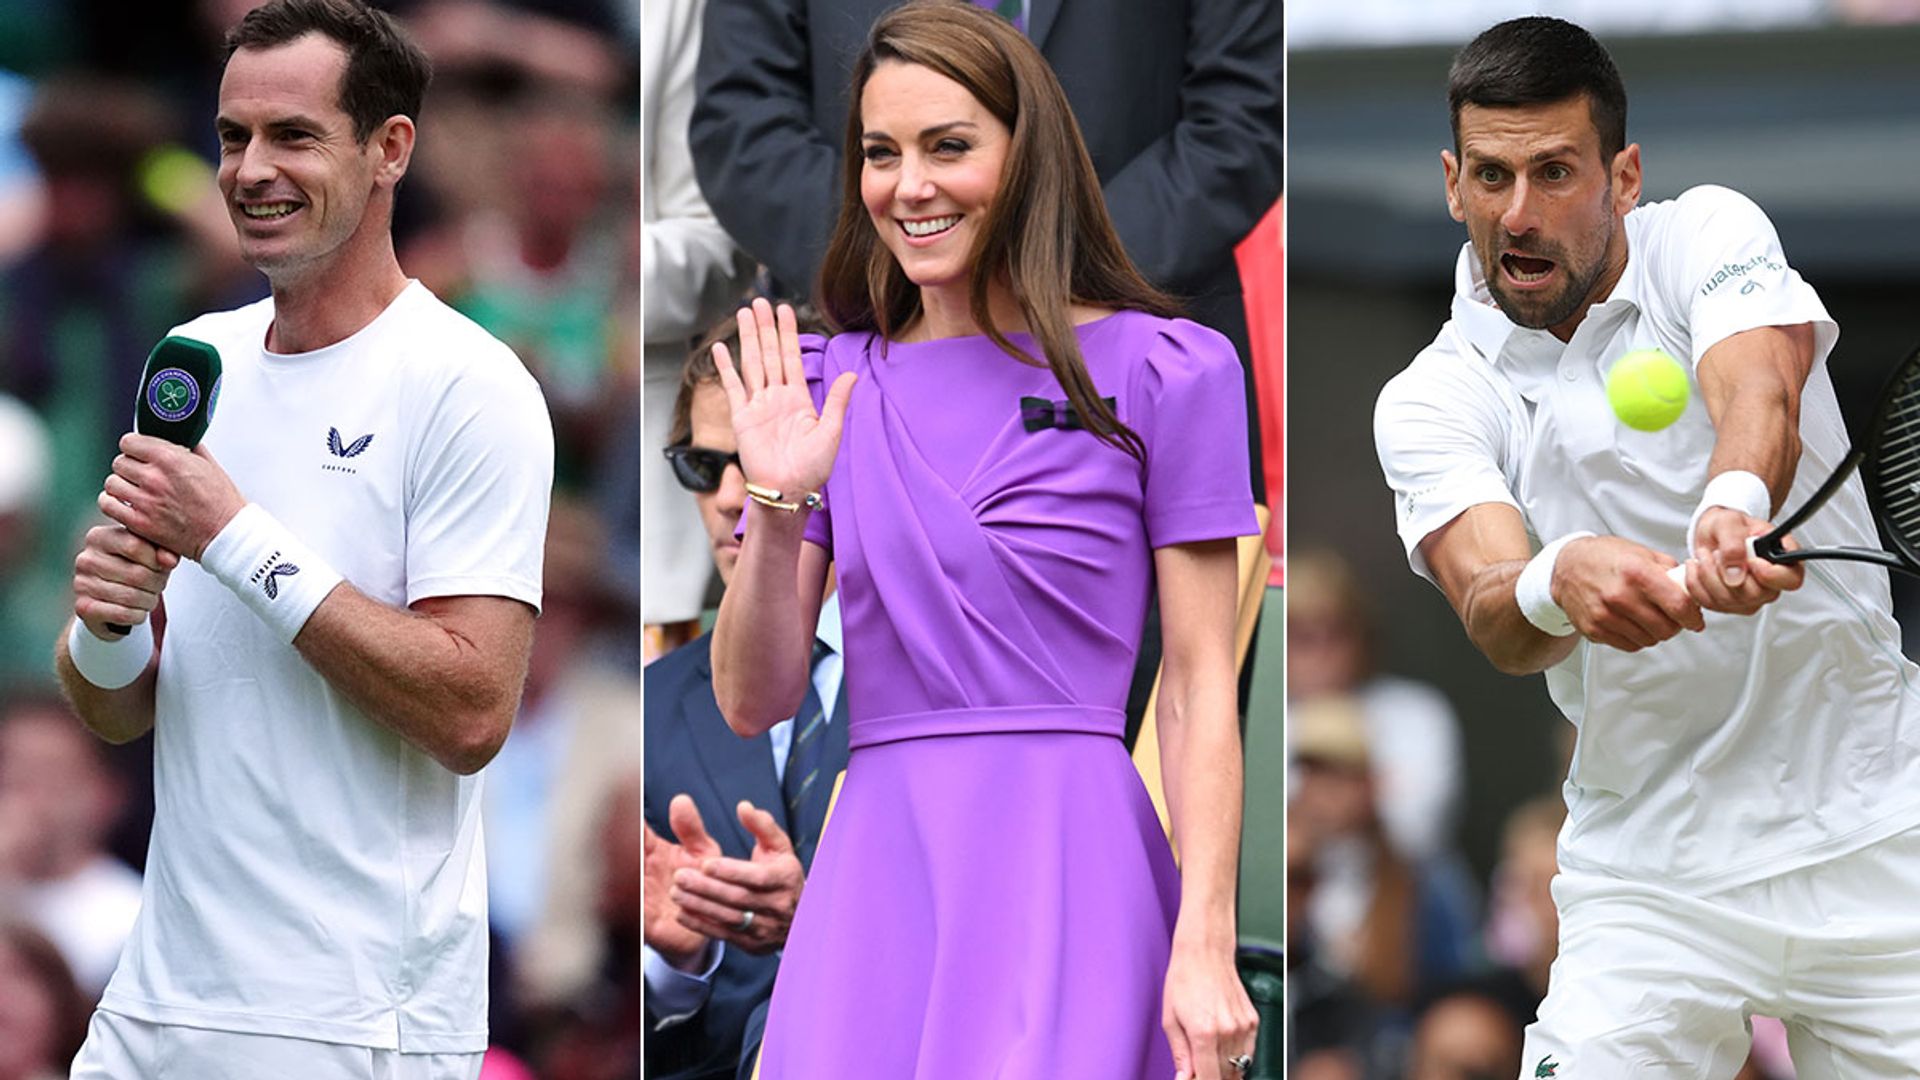 andy murray, kate middleton and novak at this year's wimbledon